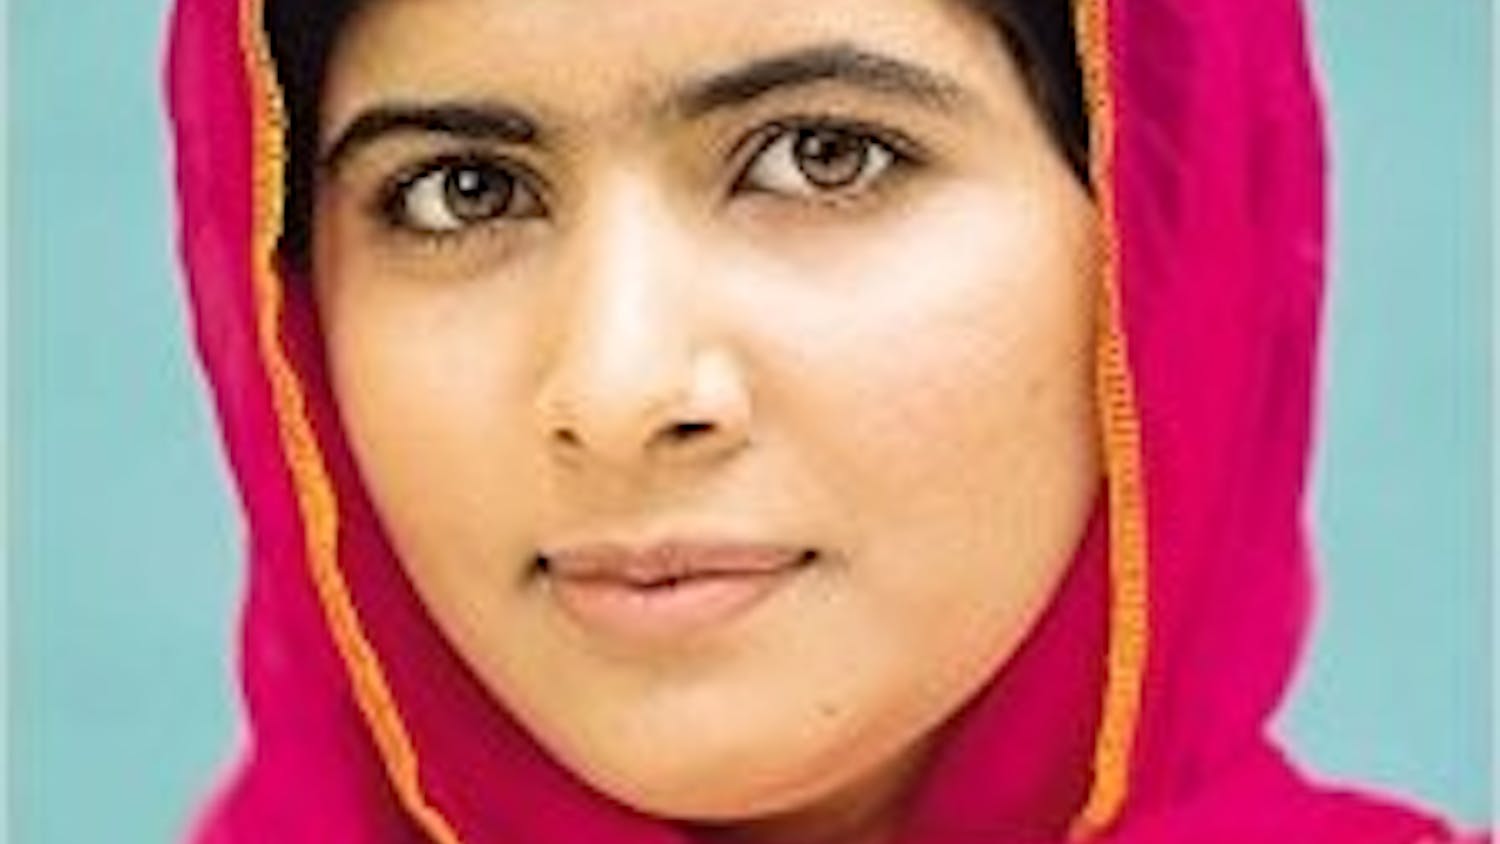 "I Am Malala: The Girl Who Stood Up for Education and was Shot by the Taliban" details Malala Yousafzai's inspiring and tireless efforts fighting for education for girls around the world.